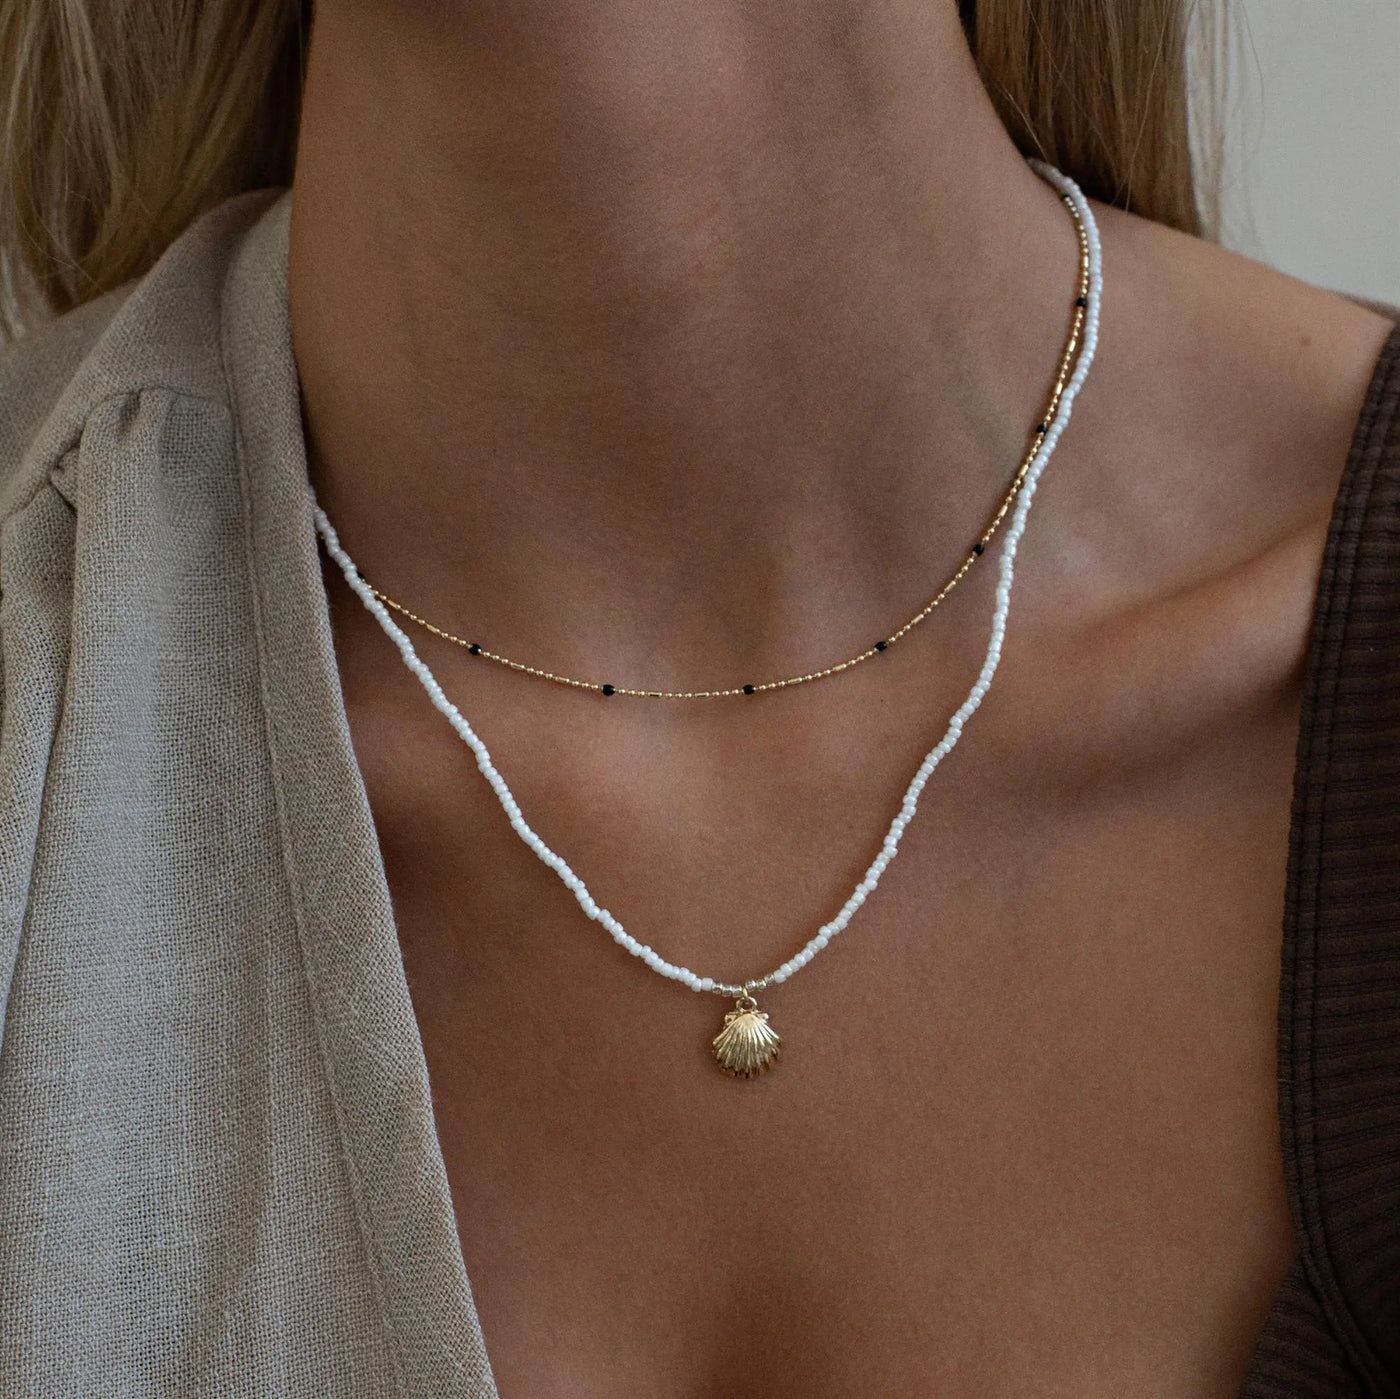 Beads with Mermaid Shell Necklace - White